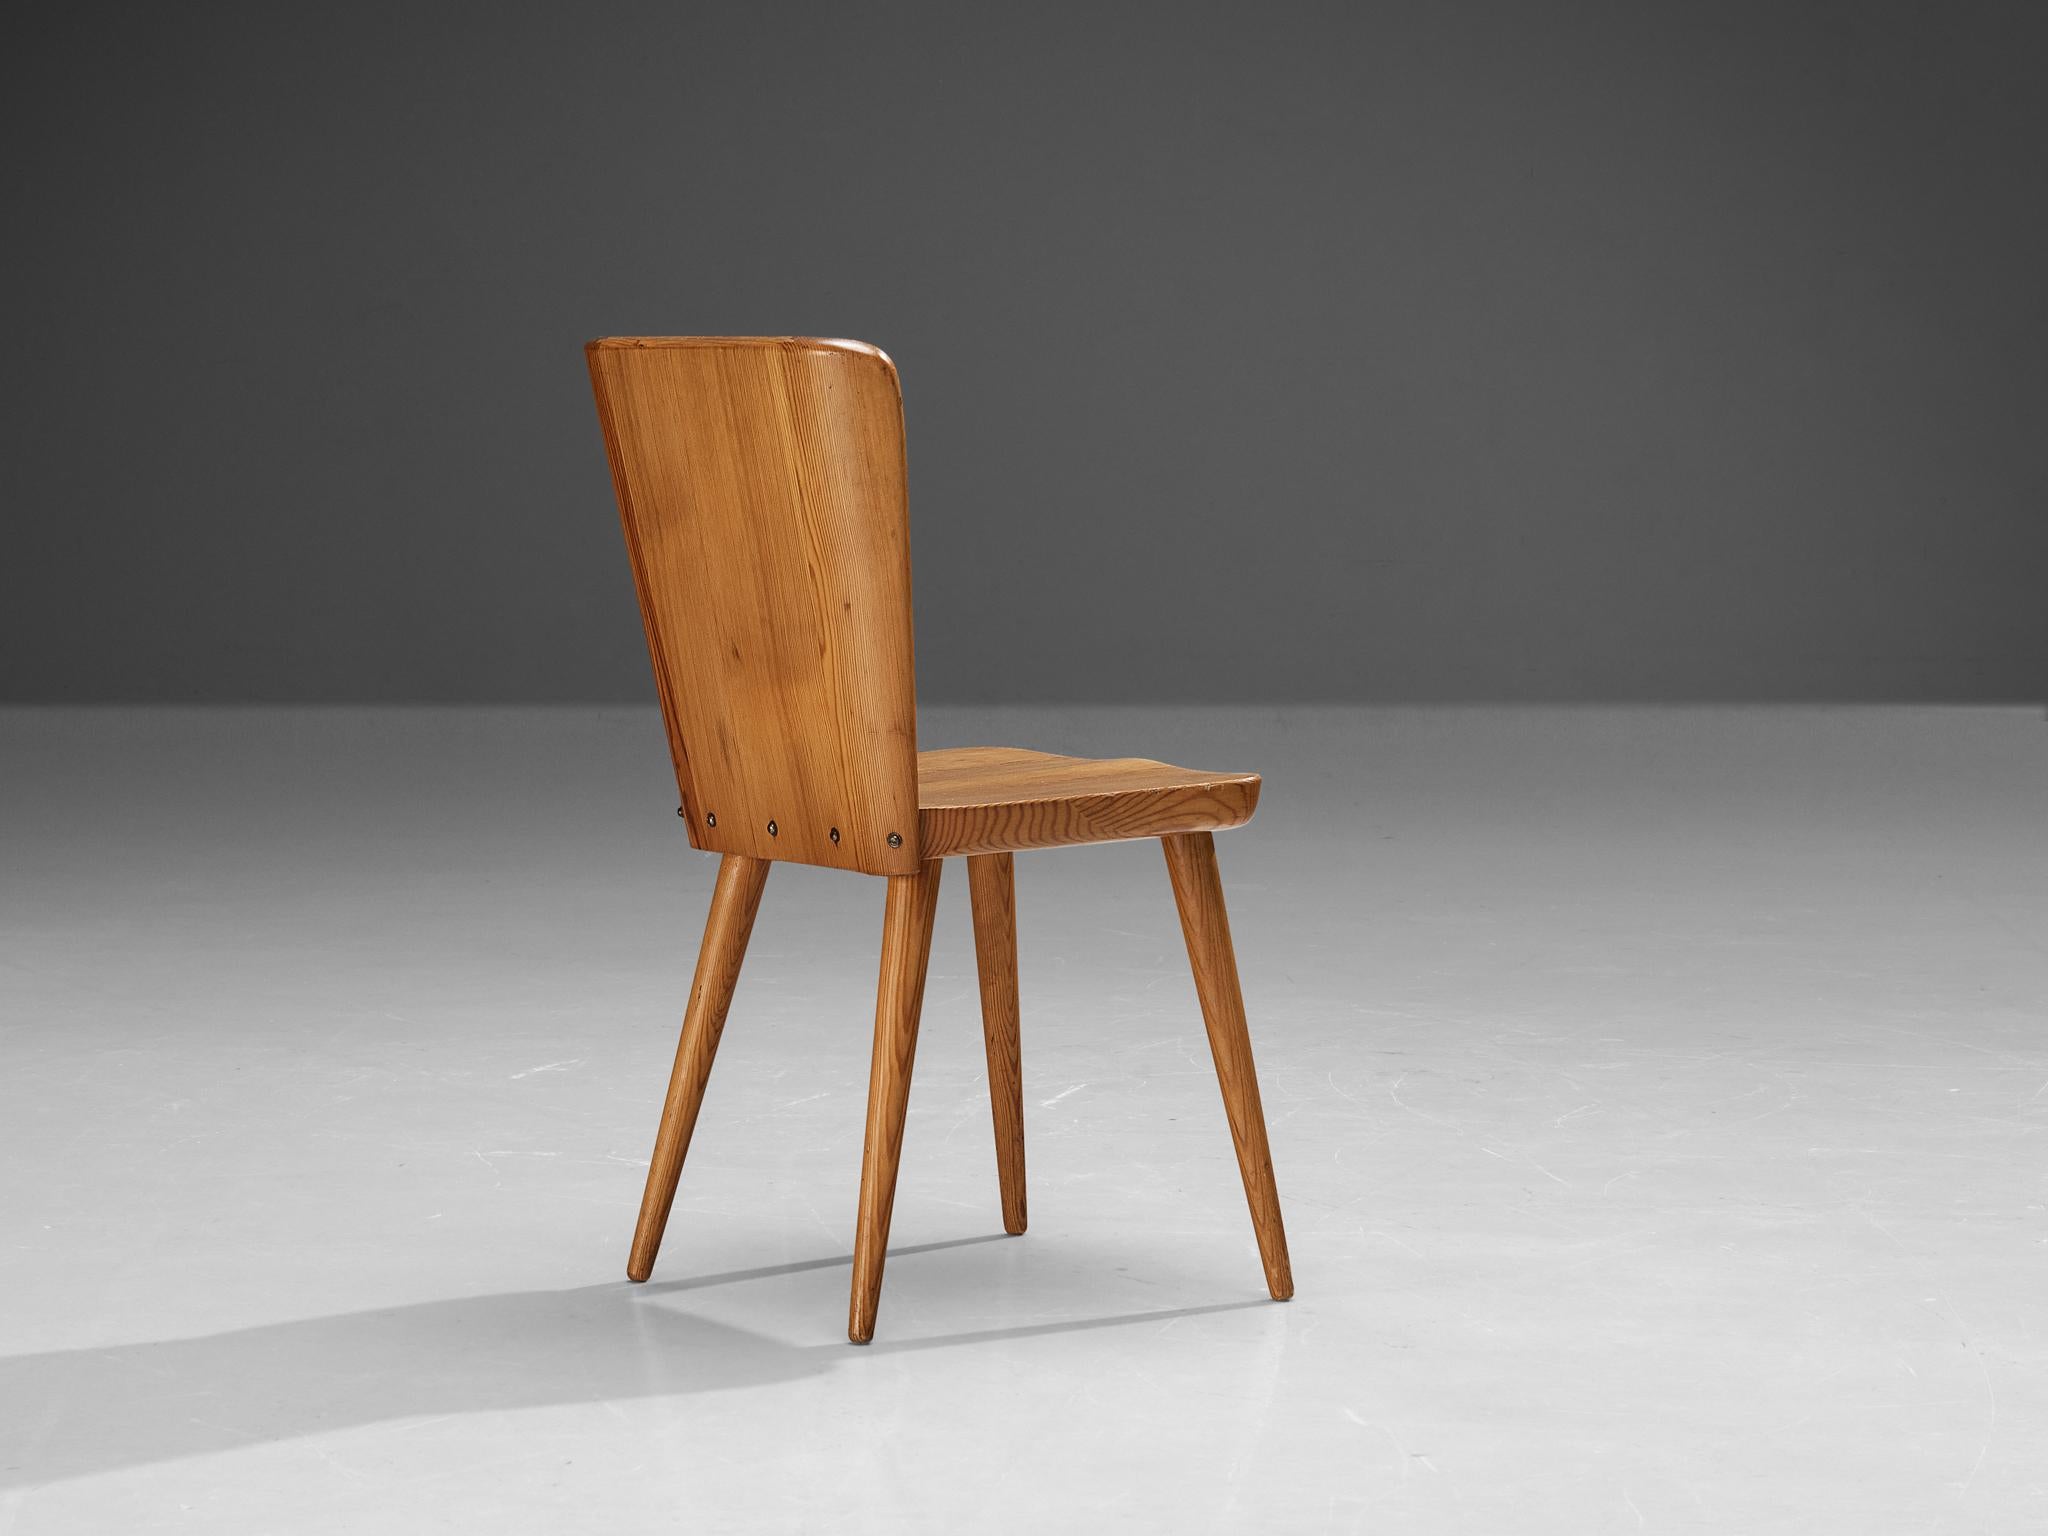 Göran Malmvall for Svensk Fur, dining chair, pine, Sweden, 1940s. 

This Swedish dining chair holds a strong expression with this sturdy shaped design. The backrests runs wide near the top and consists of straight and slightly curved near near the